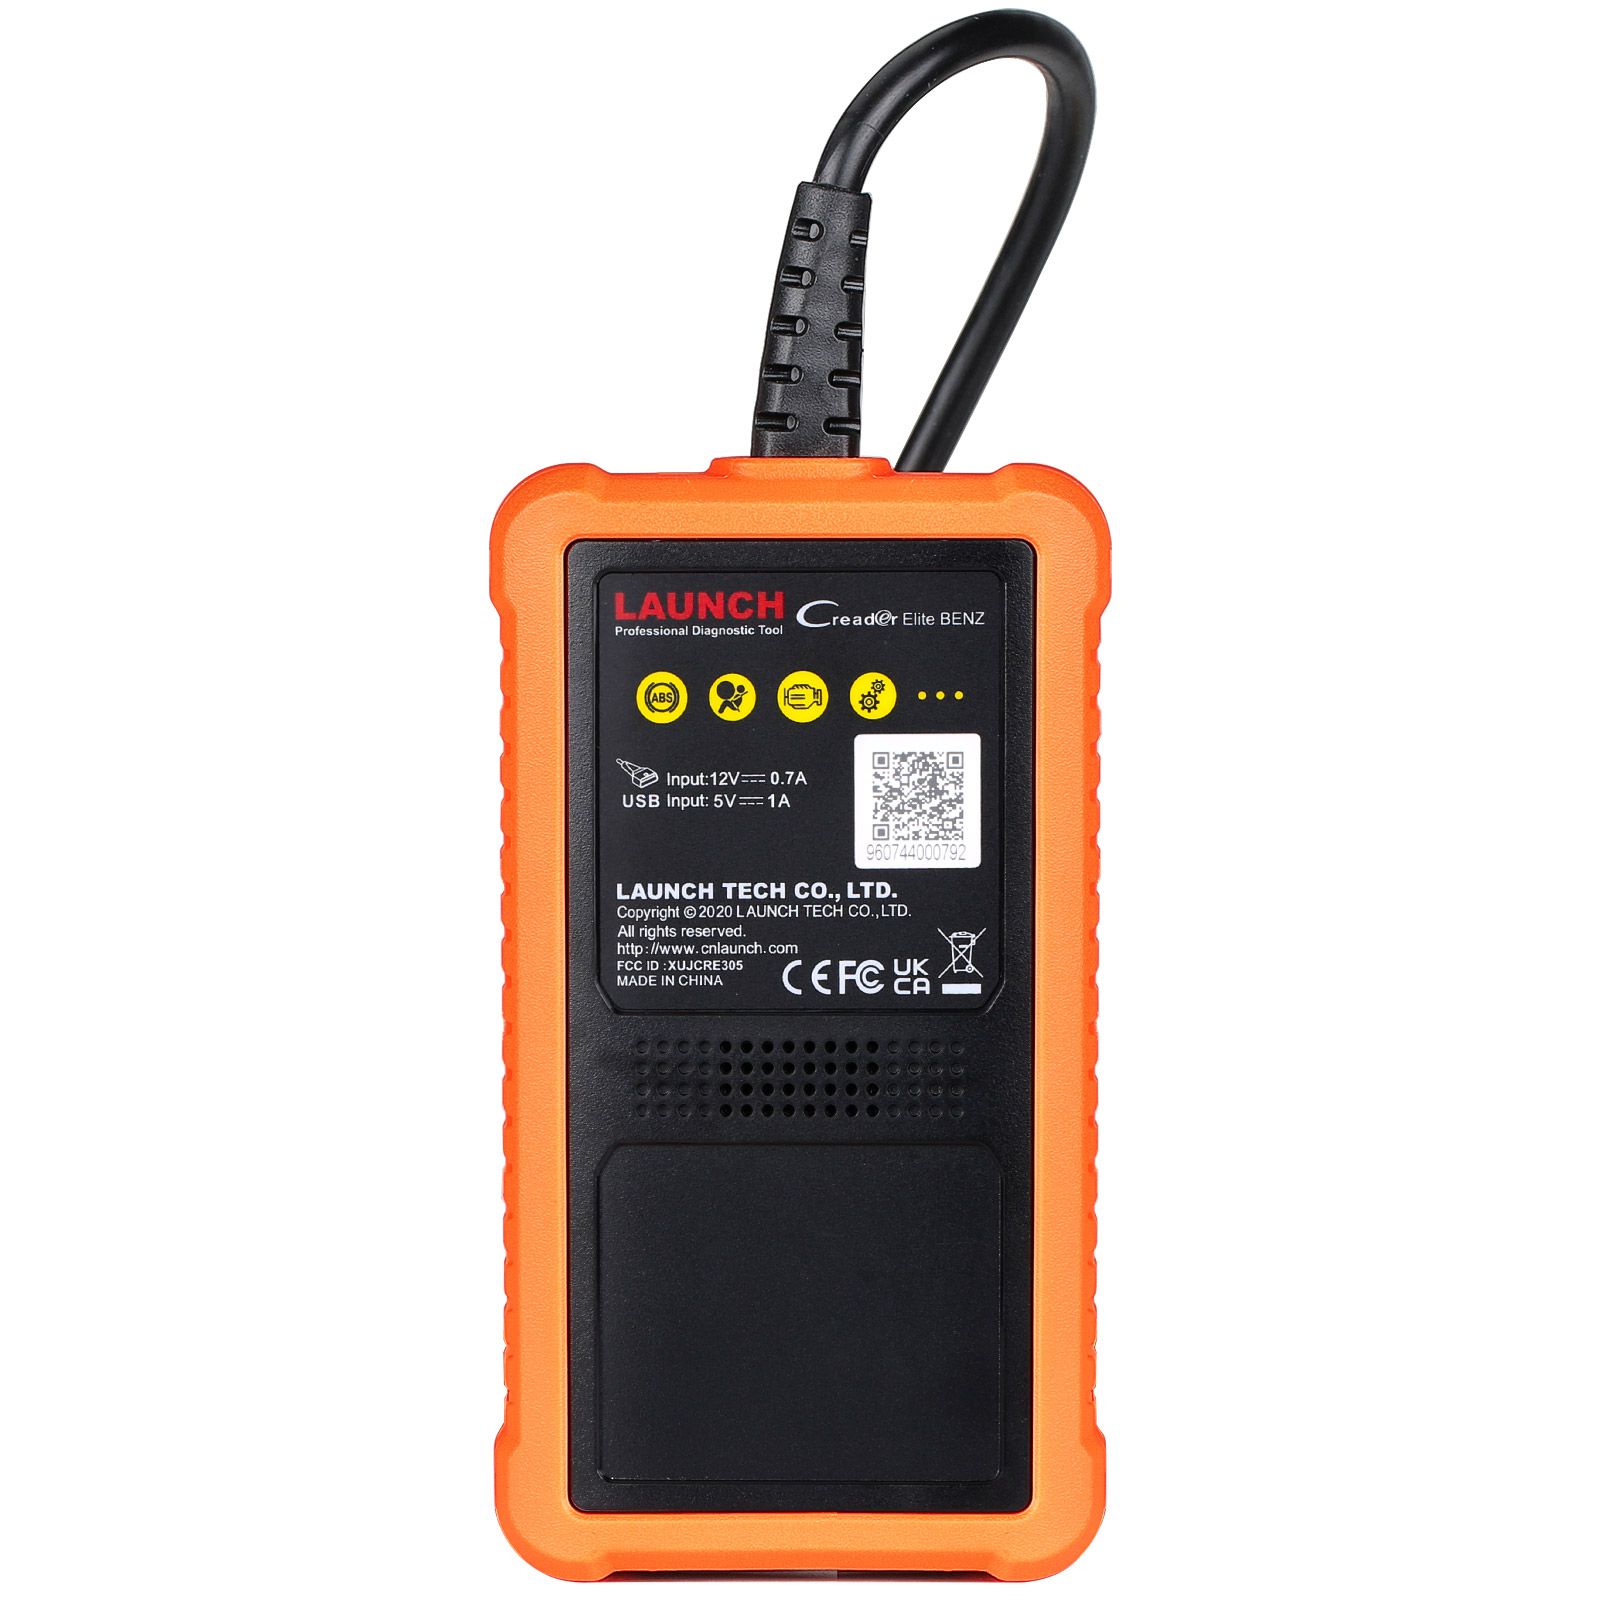 2022 Newest Launch Creader Elite For BENZ Full-system Diagnosis Tool OBDII Scanner